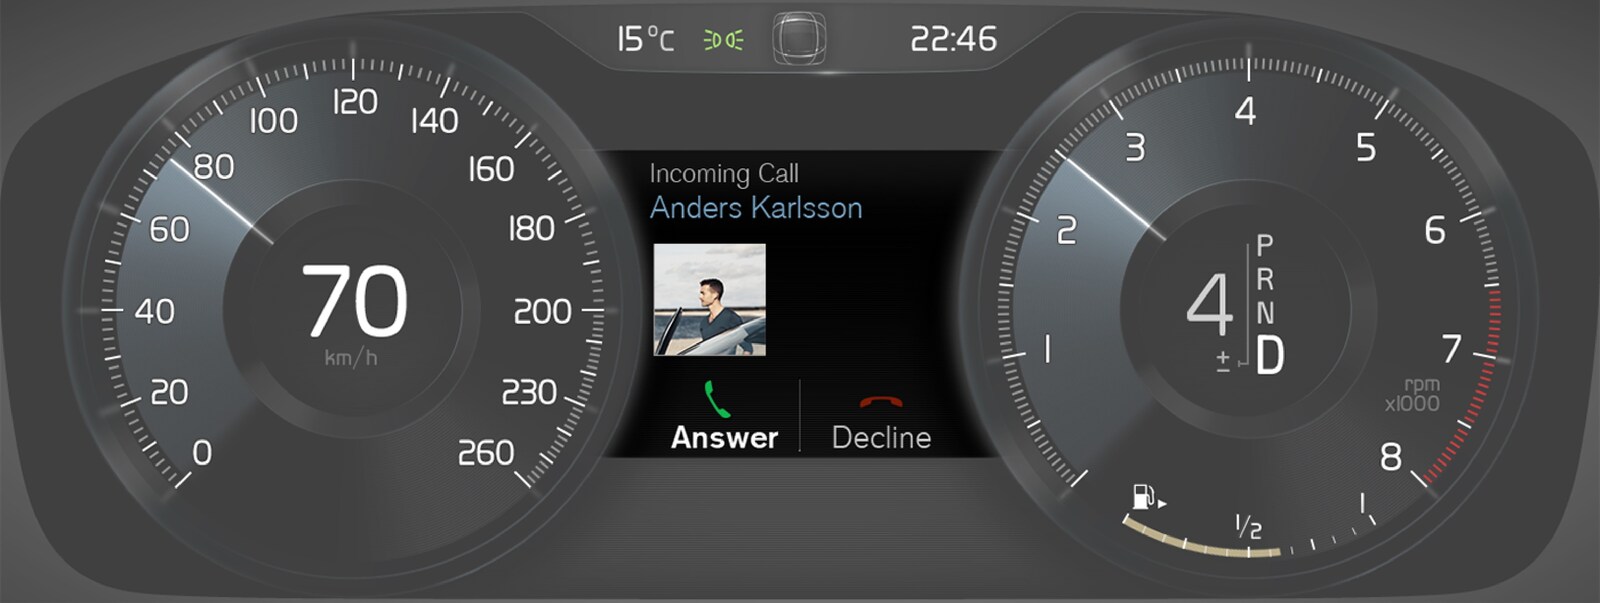 P5-1507–I+C–Message in driver display